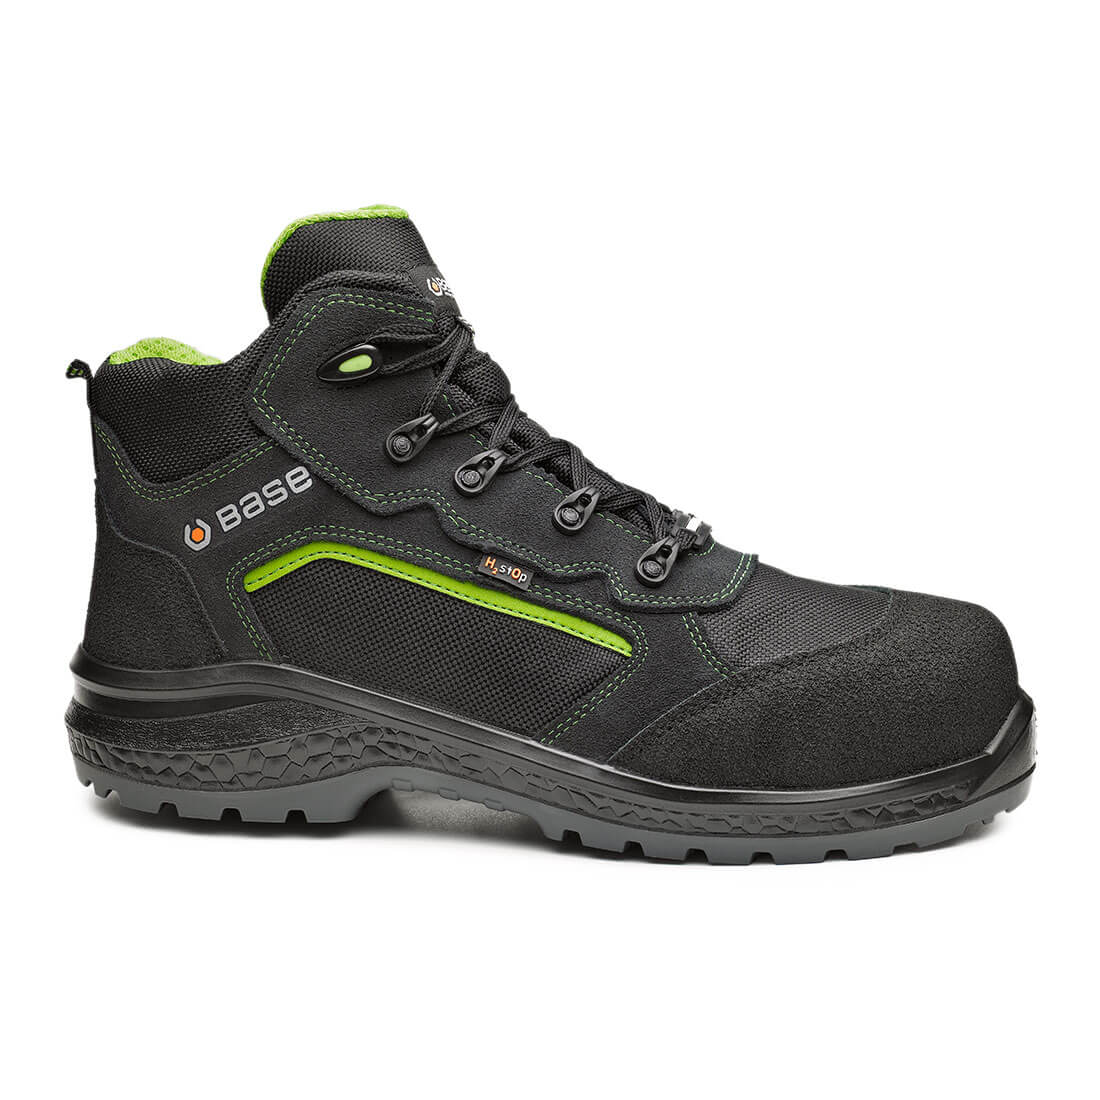 Base Be-Powerful Top Toe Cap Work Safety Shoes Black/Green 1#colour_black-green